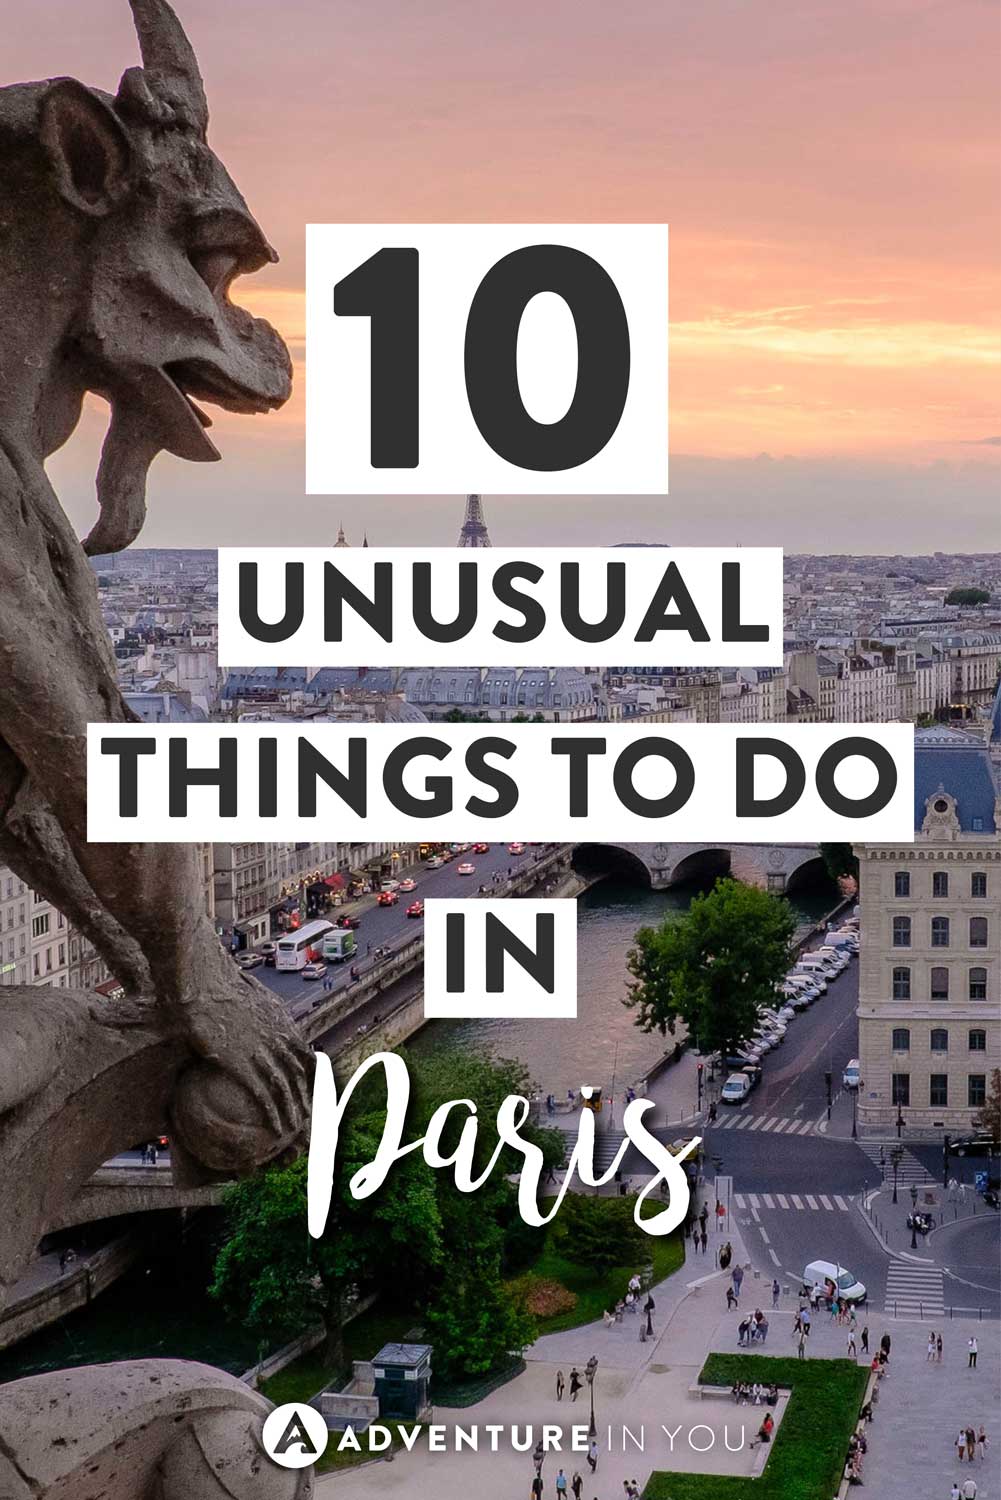 Paris Travel | Looking for unusual things to do in Paris? Check out this guide on the best things to do in Paris aside from museums and shopping.